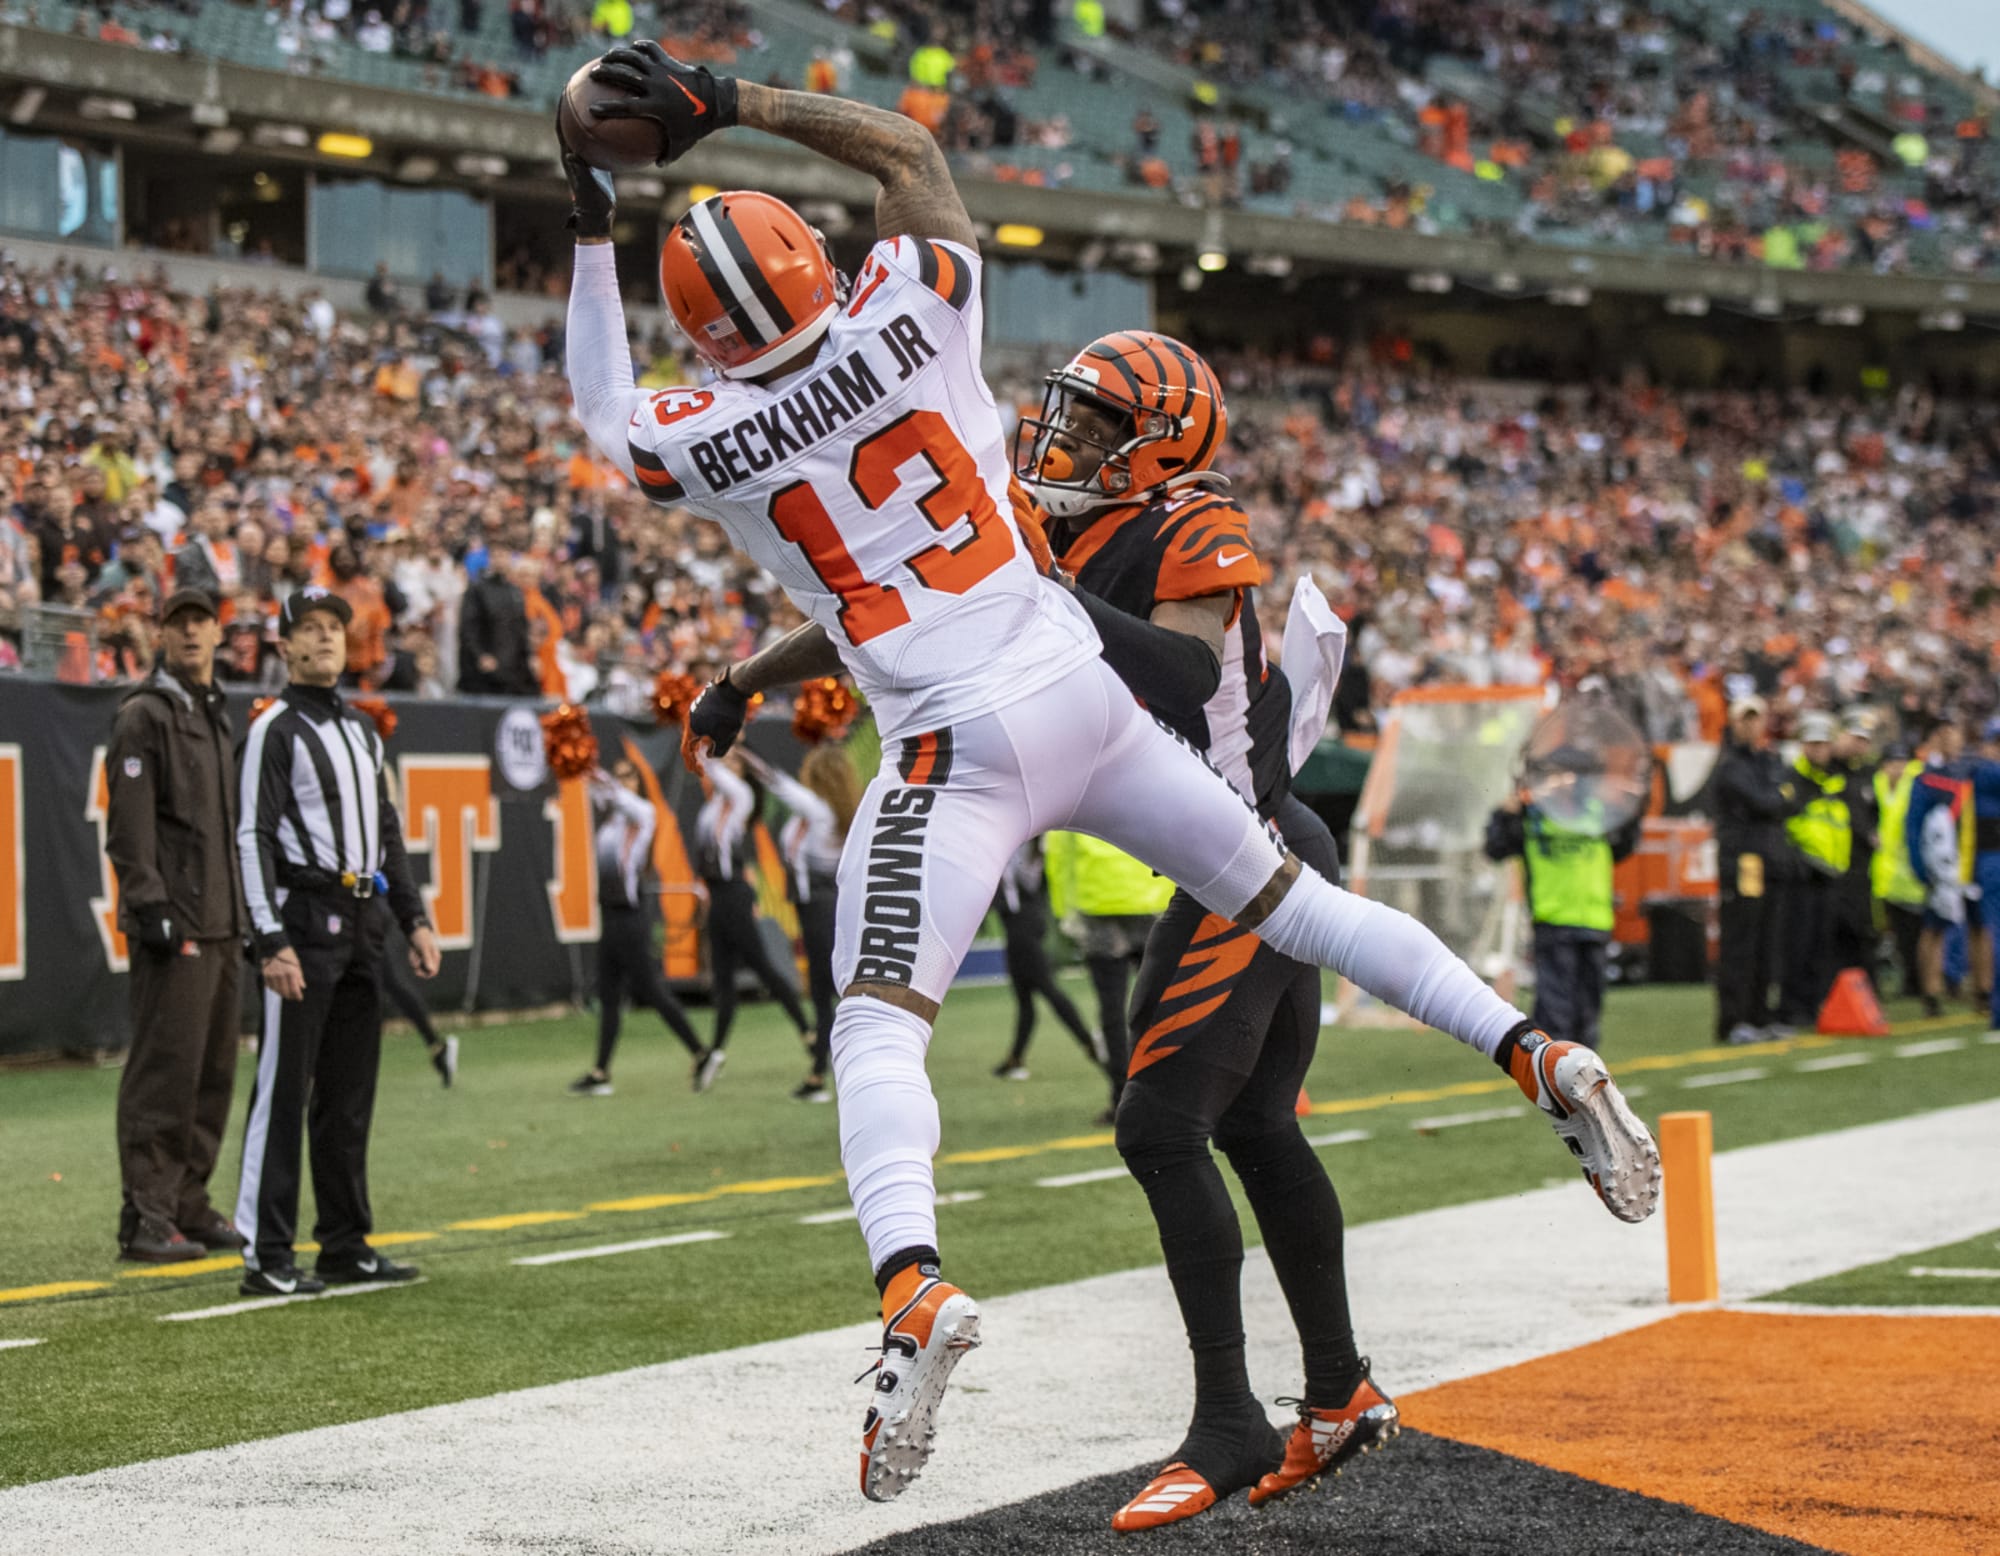 Can Odell Beckham Jr. return to elite status with Browns in 2020?